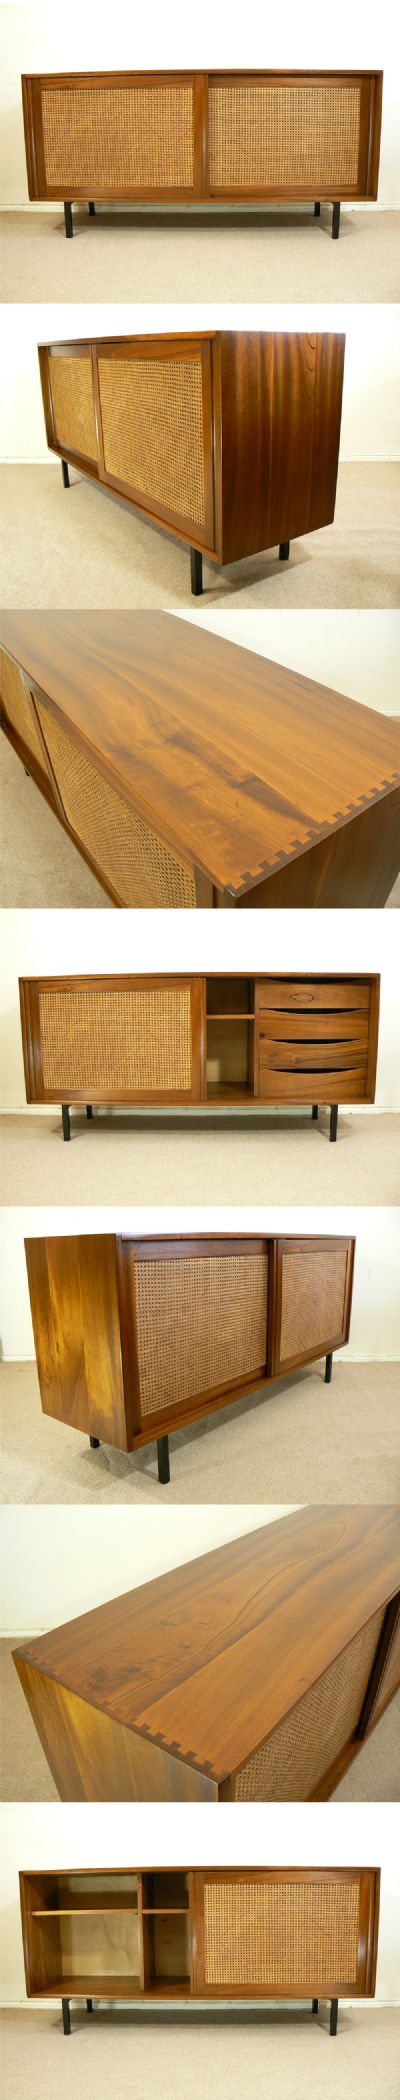 A superb wicker fronted sideboard c1960. Designed by Tony Hunt for Terence Conran,(pre Habitat).